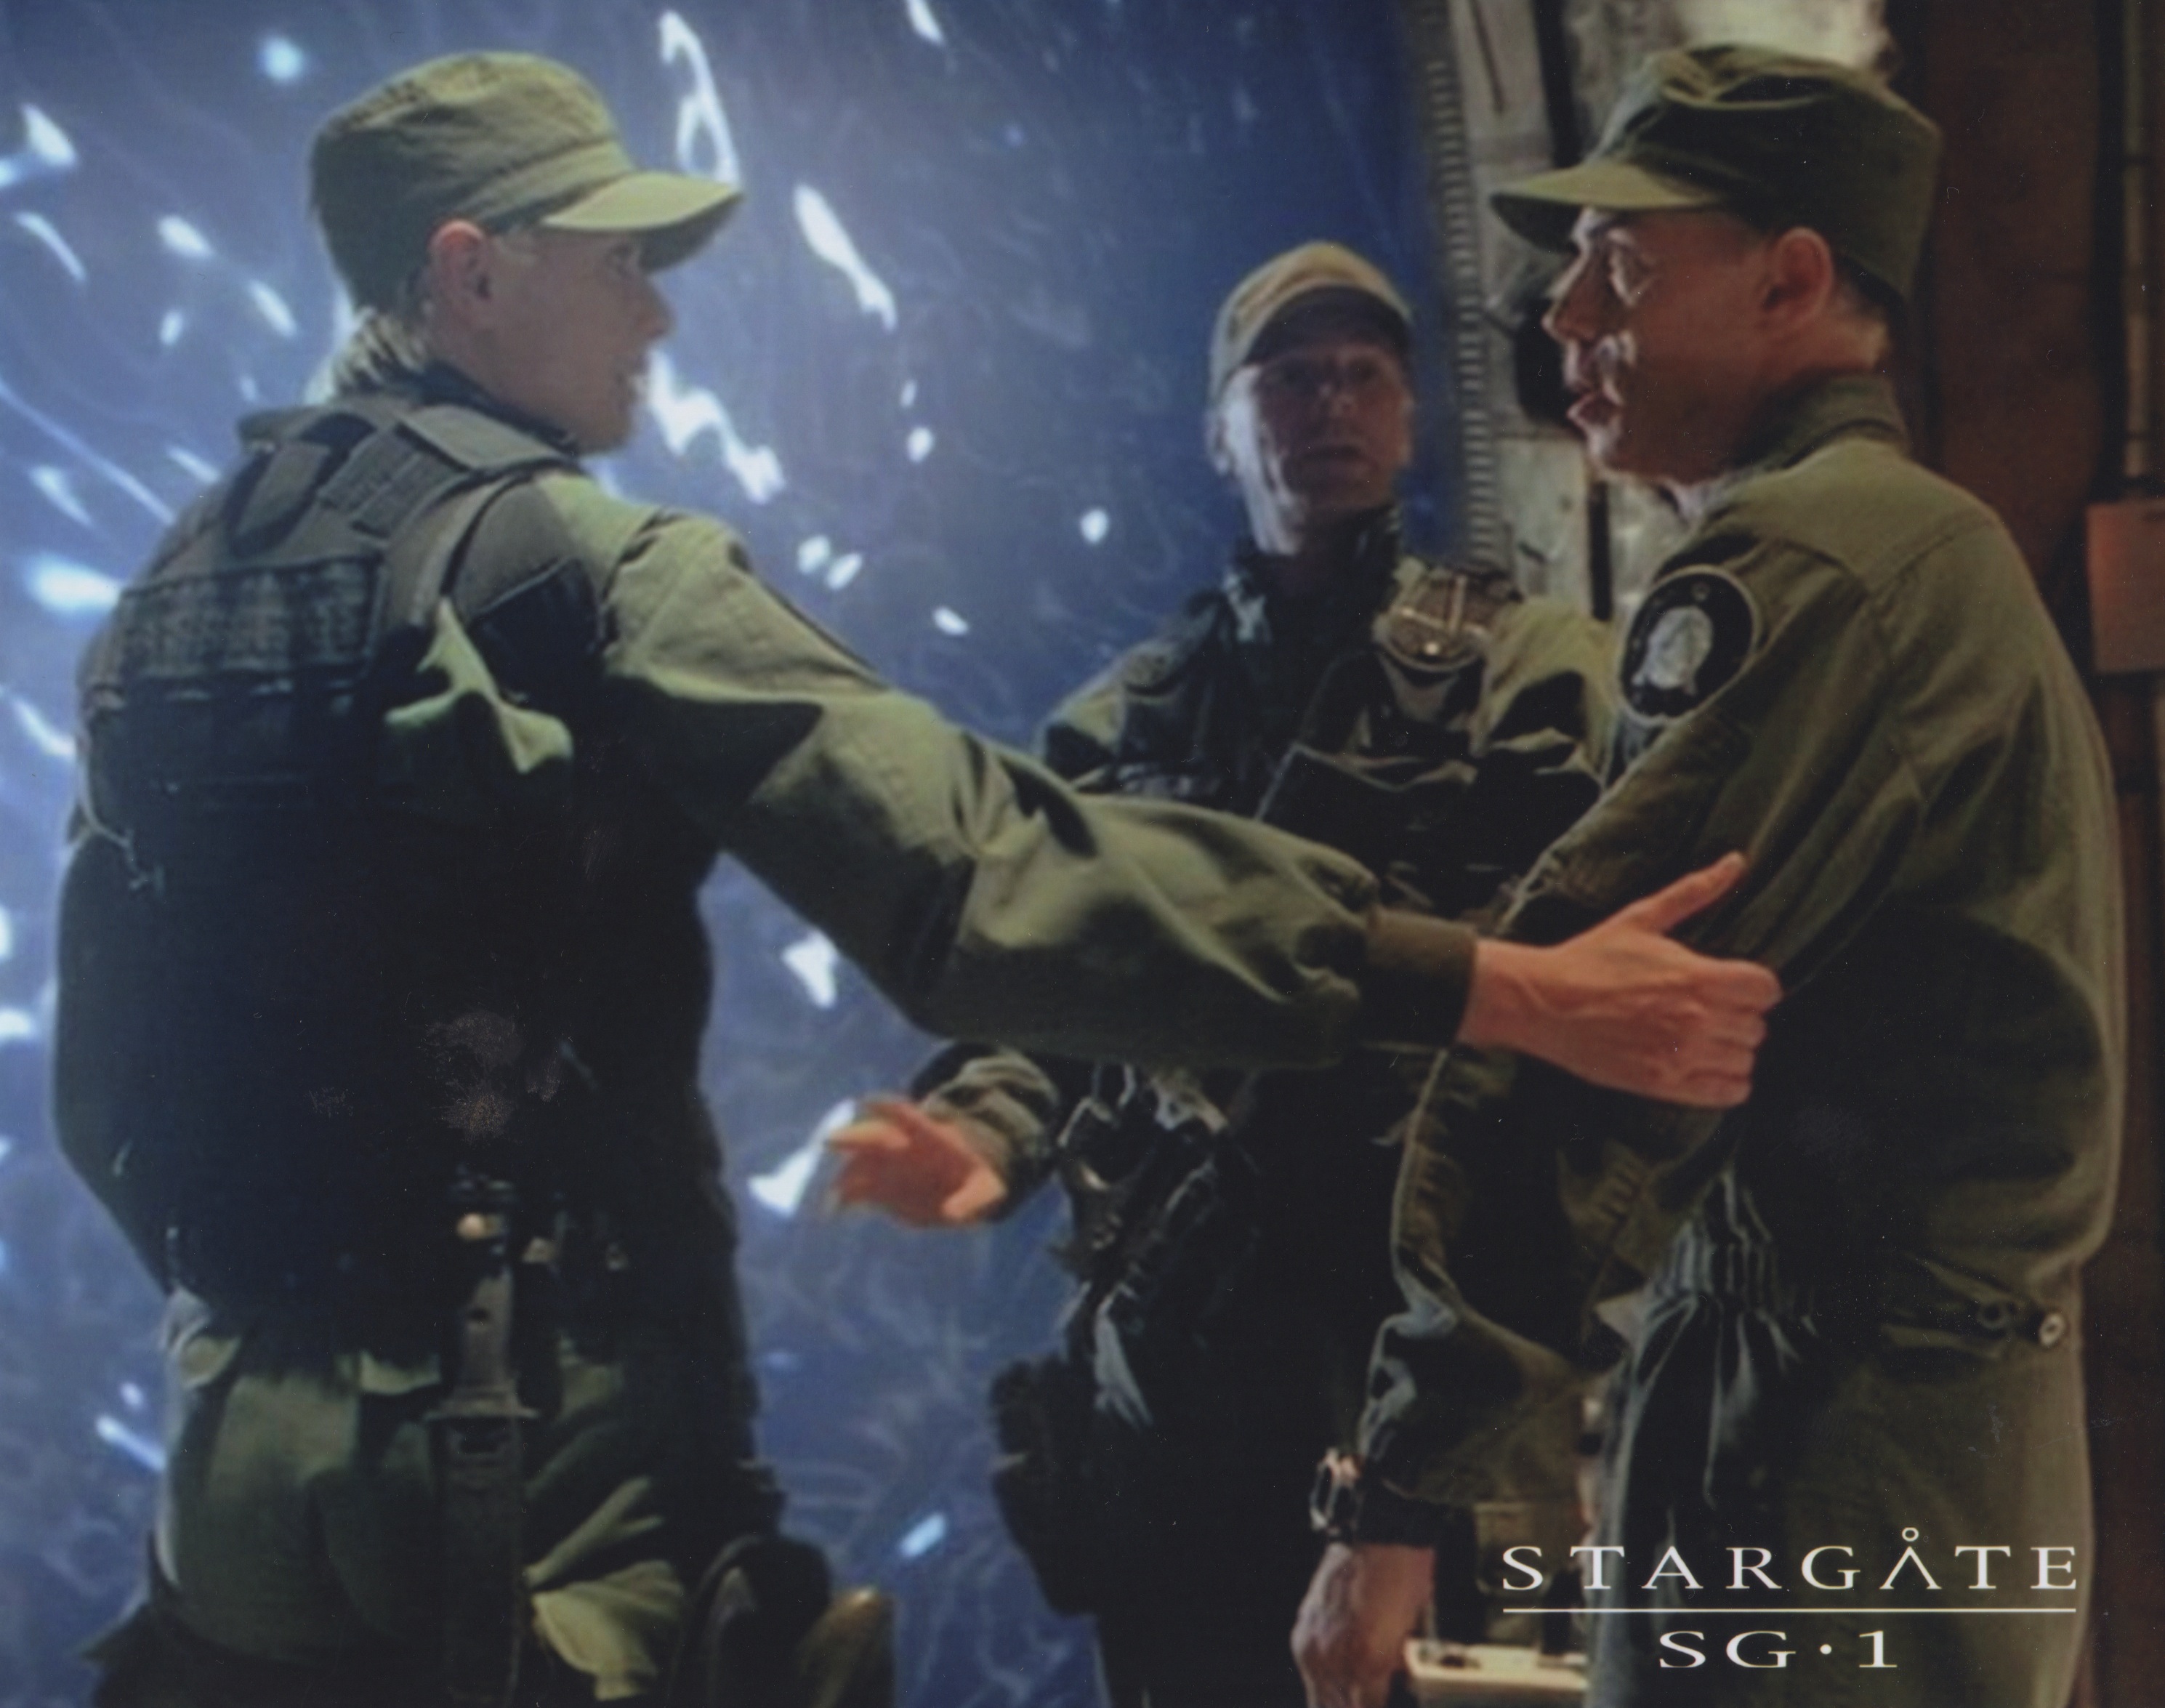 Stargate SG1: Failsafe as Spellman with Amanda Tapping and Richard Dean Anderson